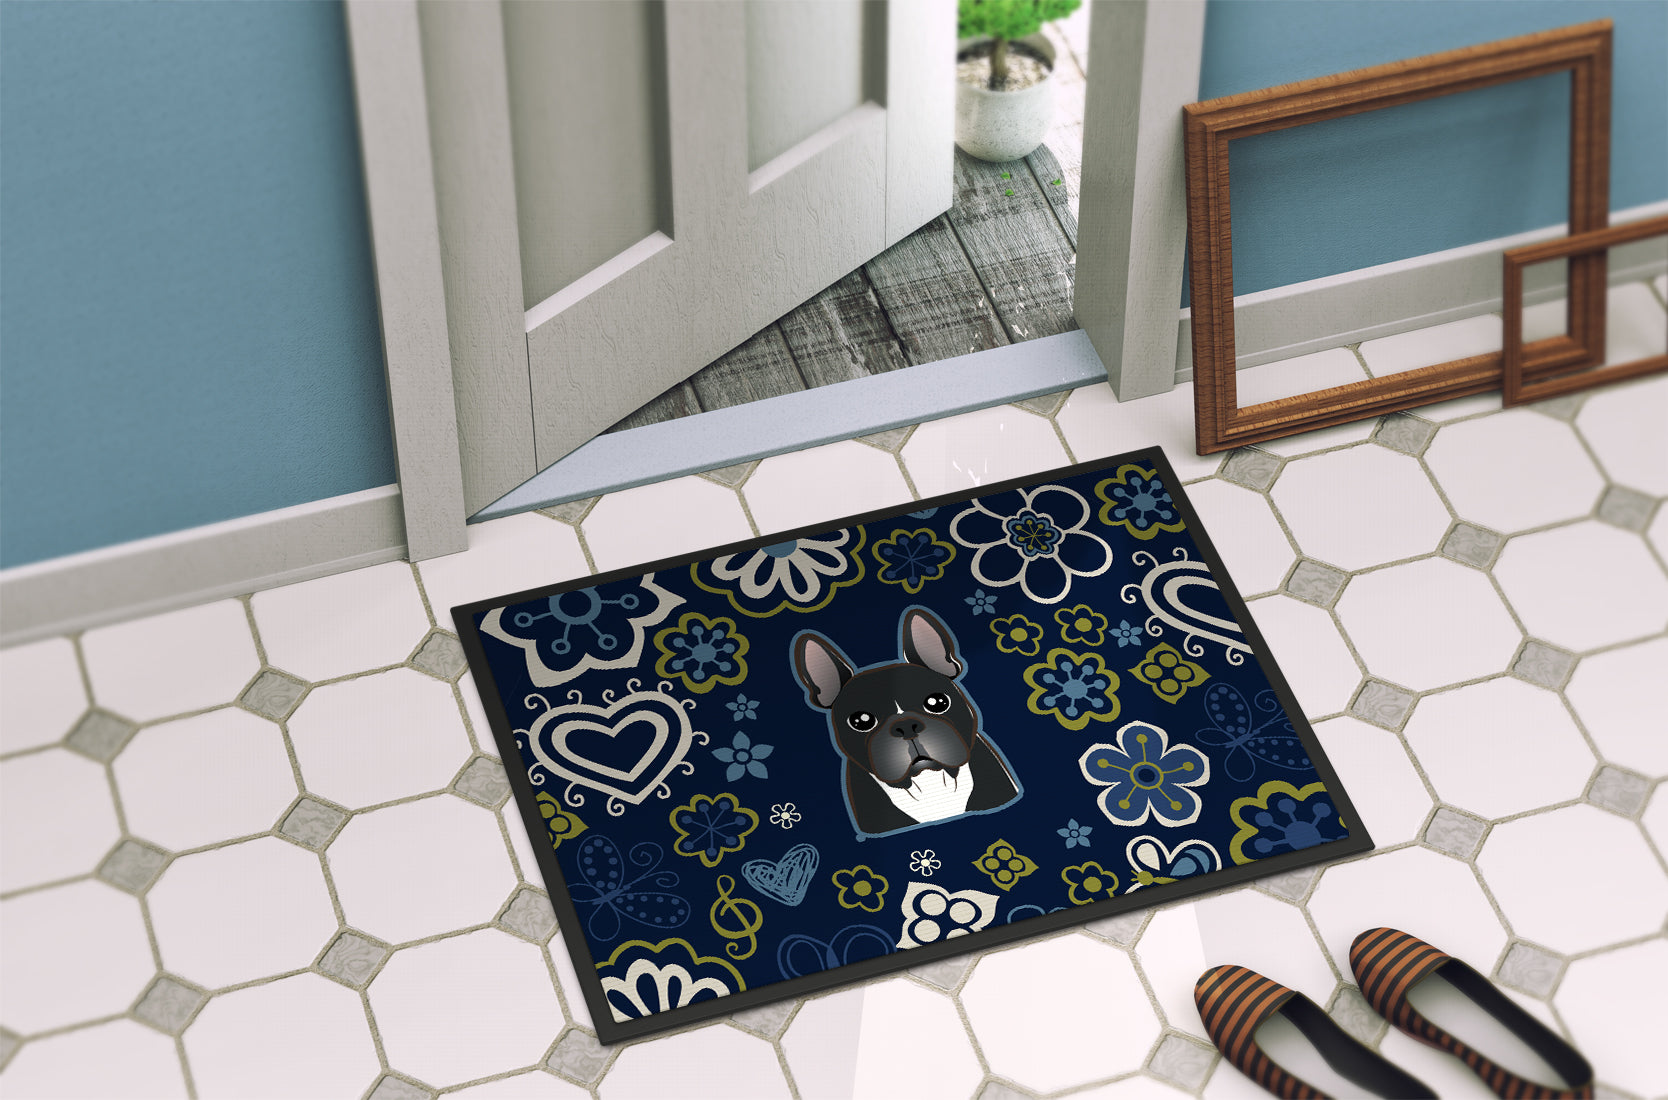 Blue Flowers French Bulldog Indoor or Outdoor Mat 18x27 BB5078MAT - the-store.com